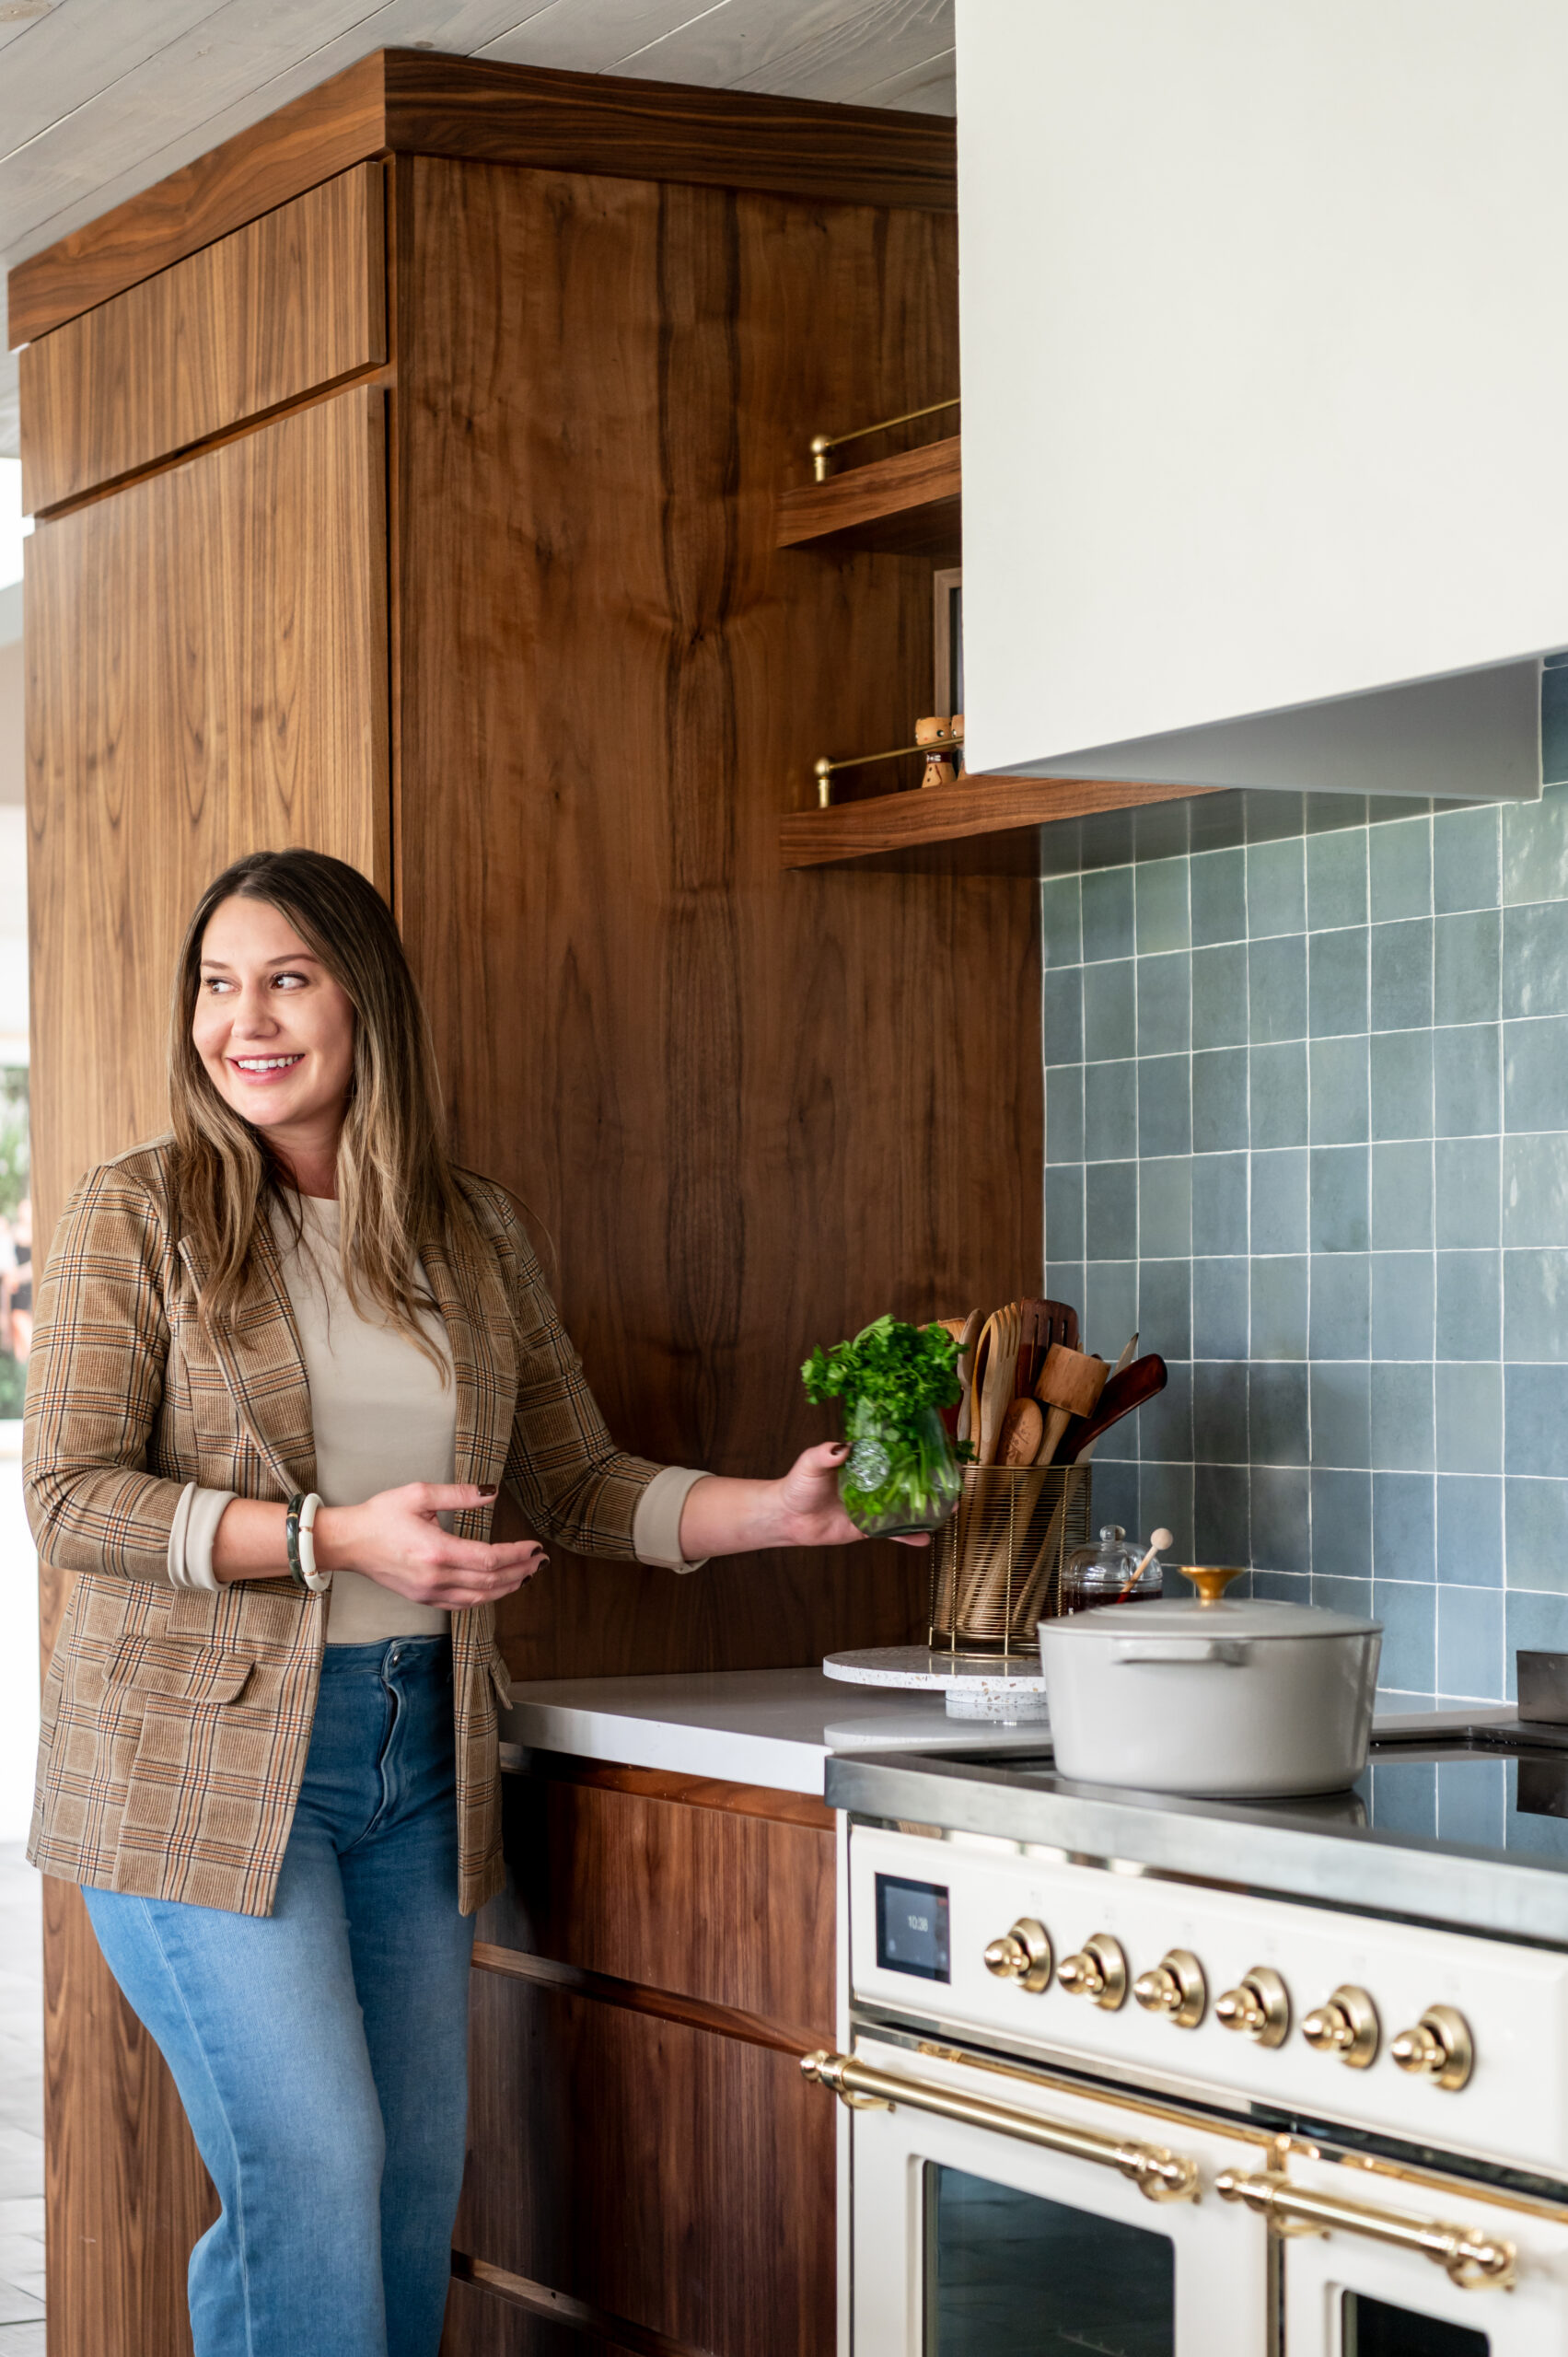 Woman smiling in a beautiful kitchen for her interior design and brand photography shoot